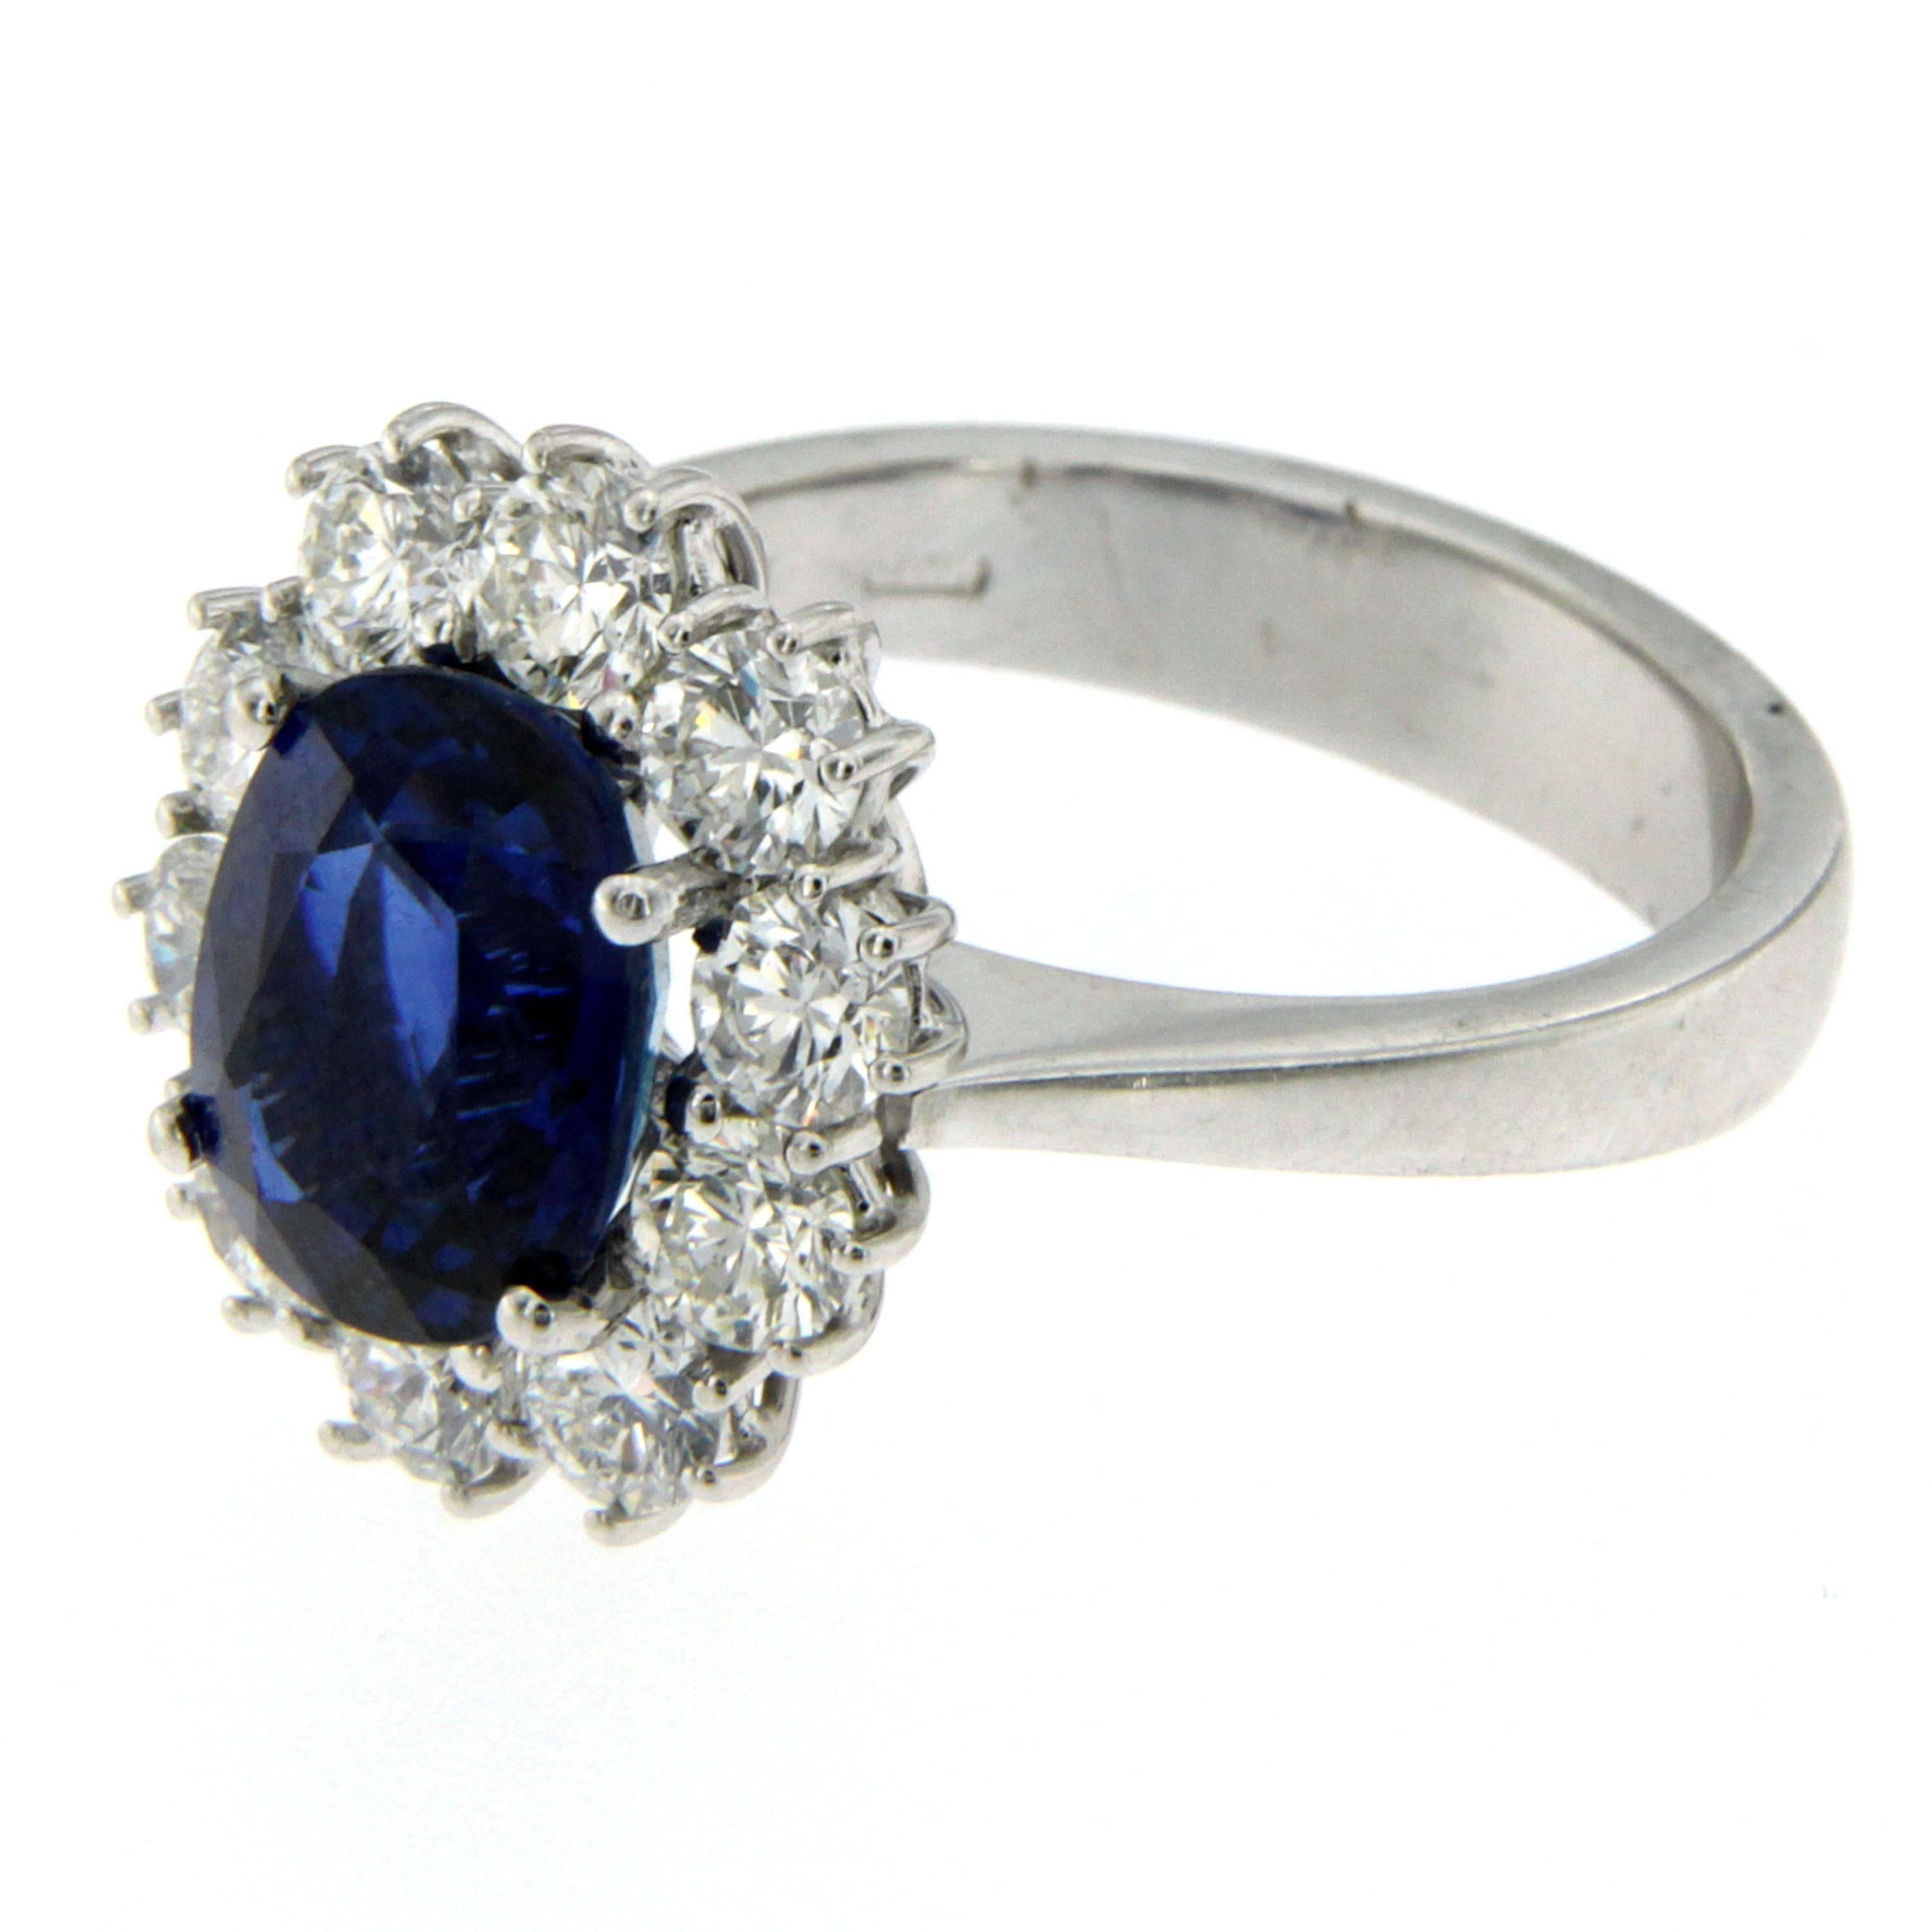 A fine and impressive 18k white Gold, Sapphire and Diamond cluster Ring, set in the center with an oval-cut Burma Sapphire weighing 3.85 carats of extraordinary color and clarity, graded royal Blue color,  flanked by 10 round cut diamonds weighing